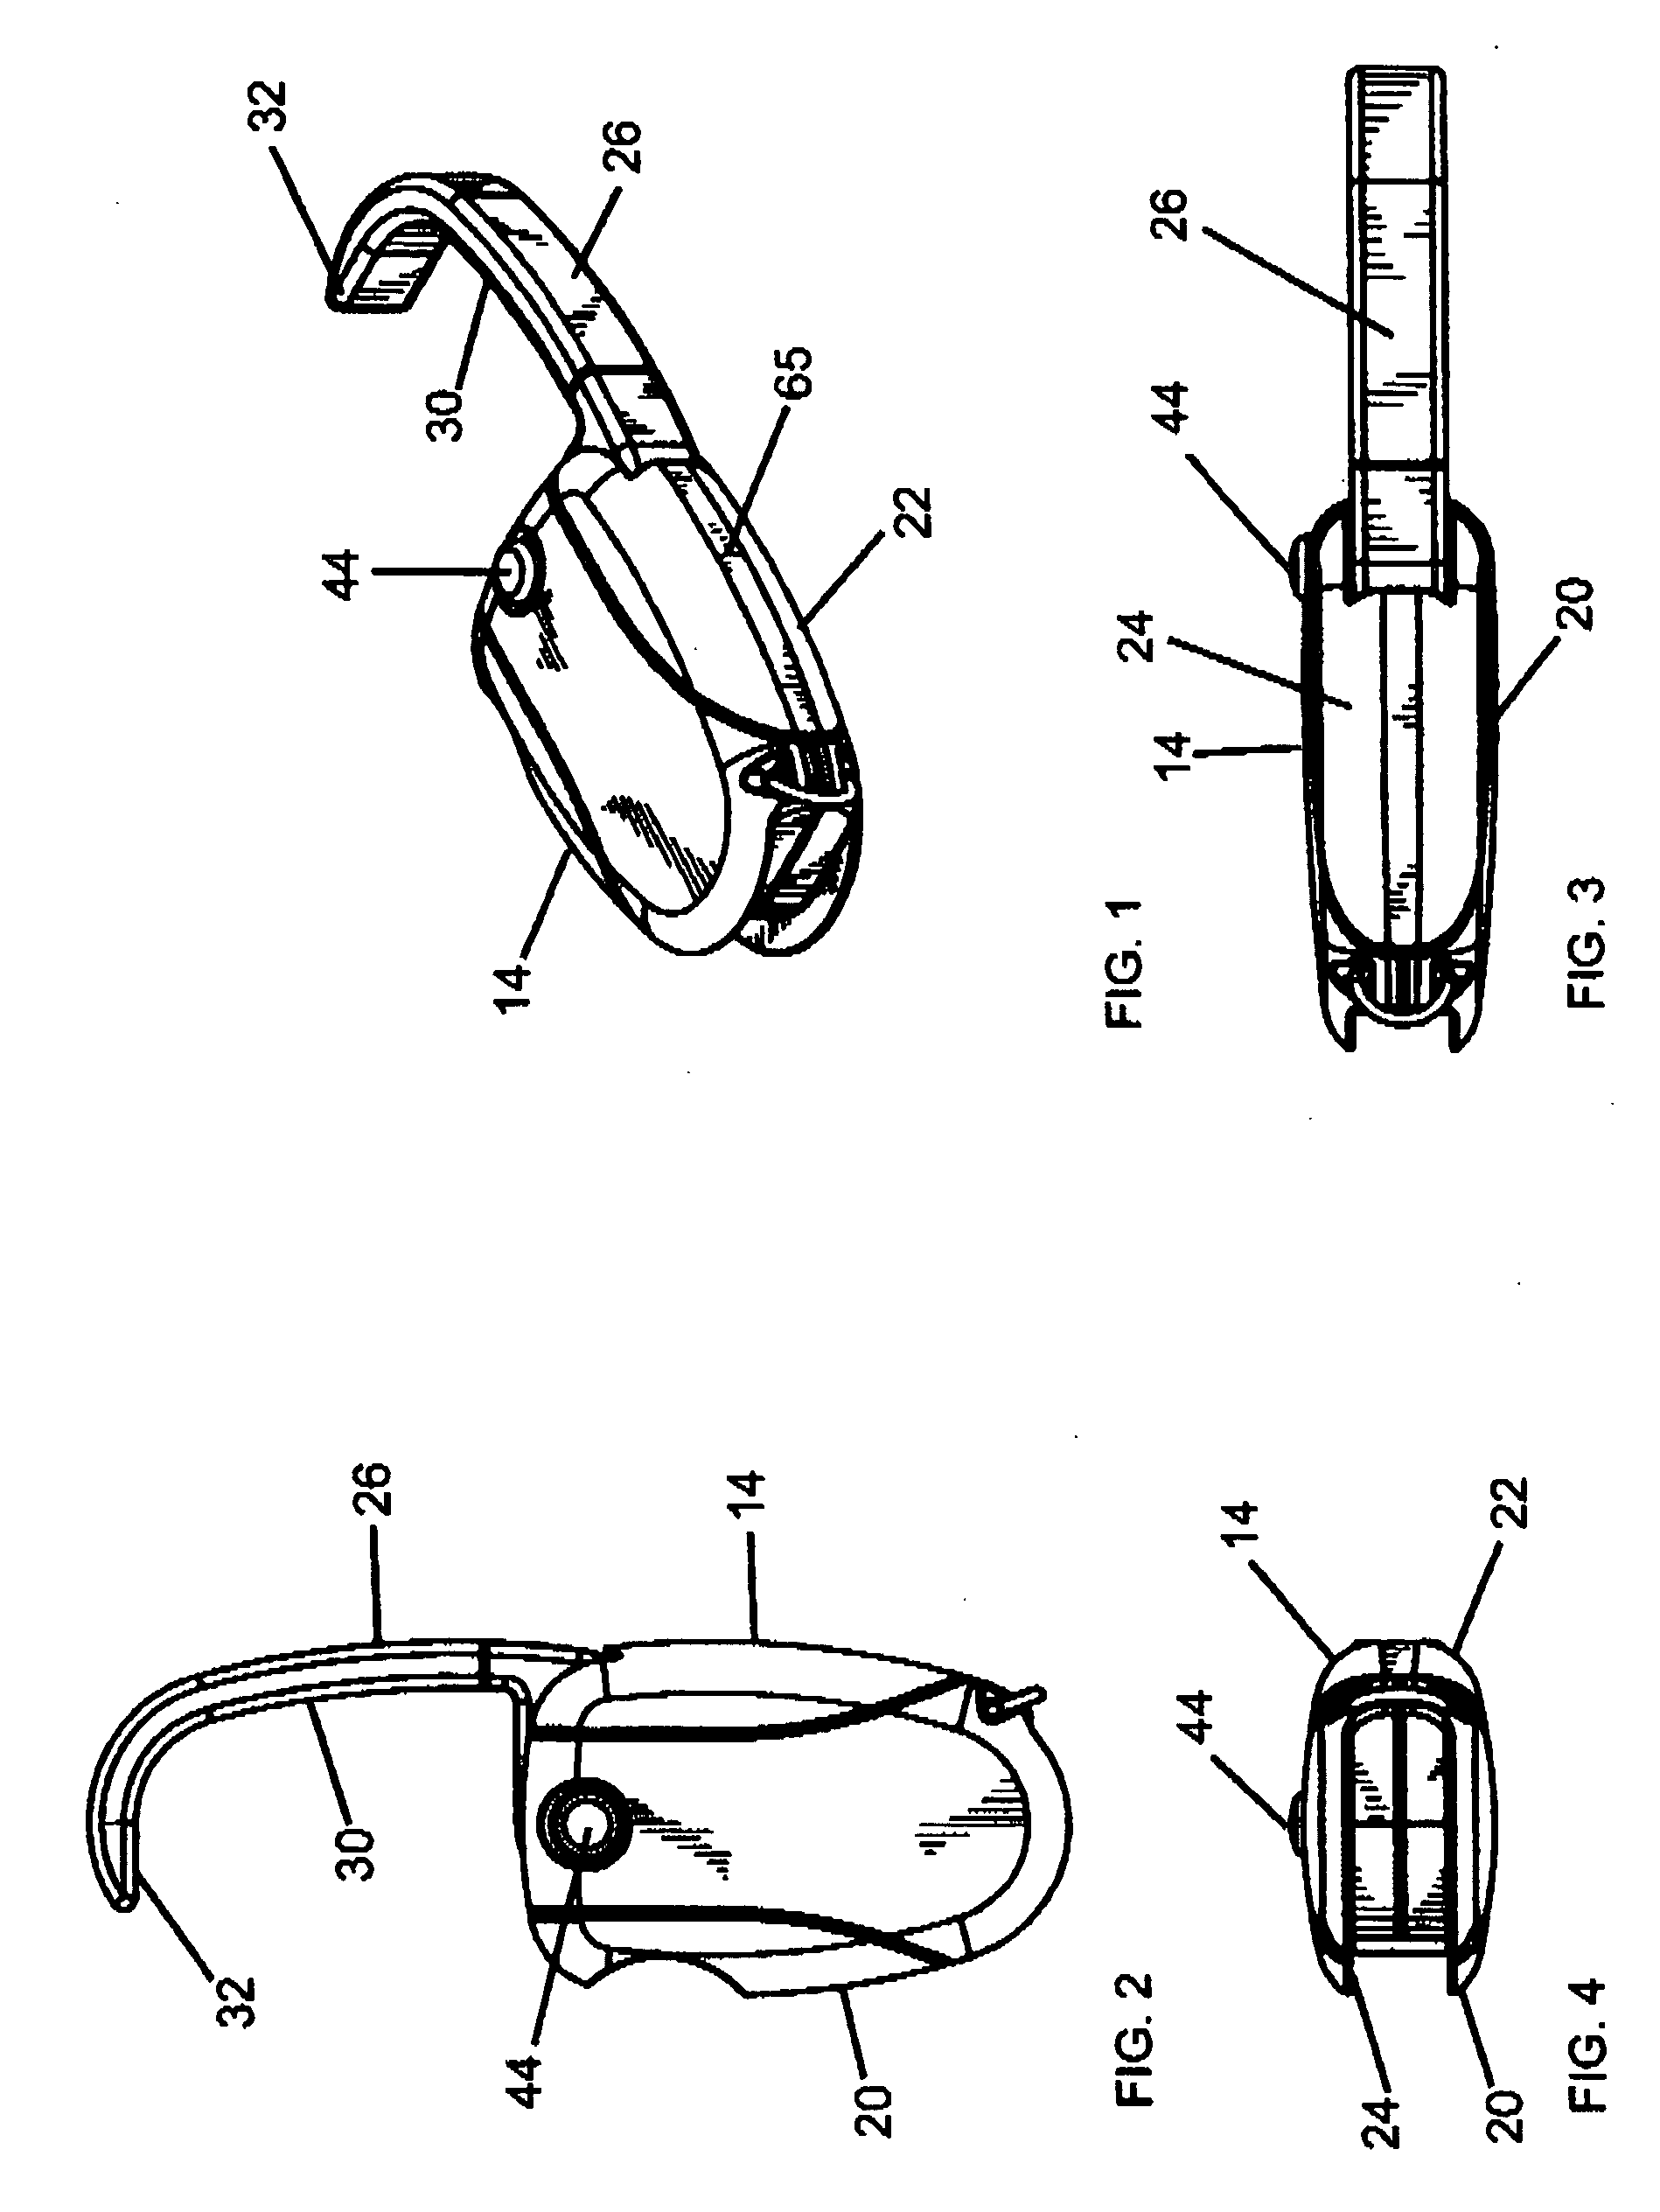 Article grasping device